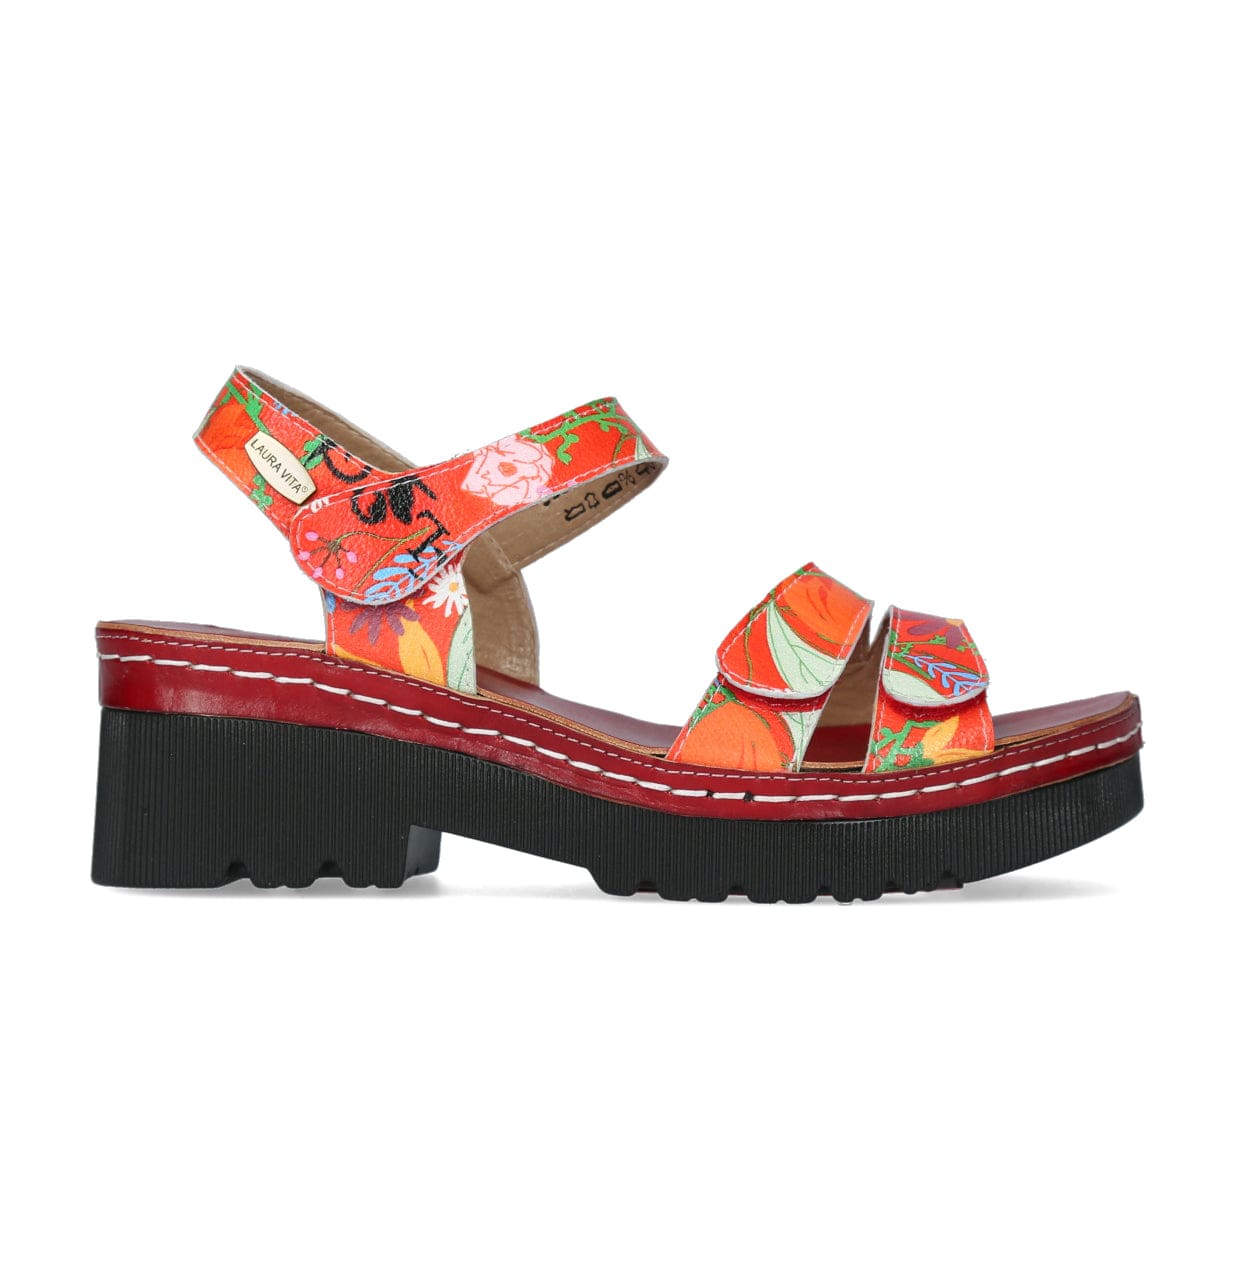 LEXIAO 03 Flower - 35 / Red - Sandal